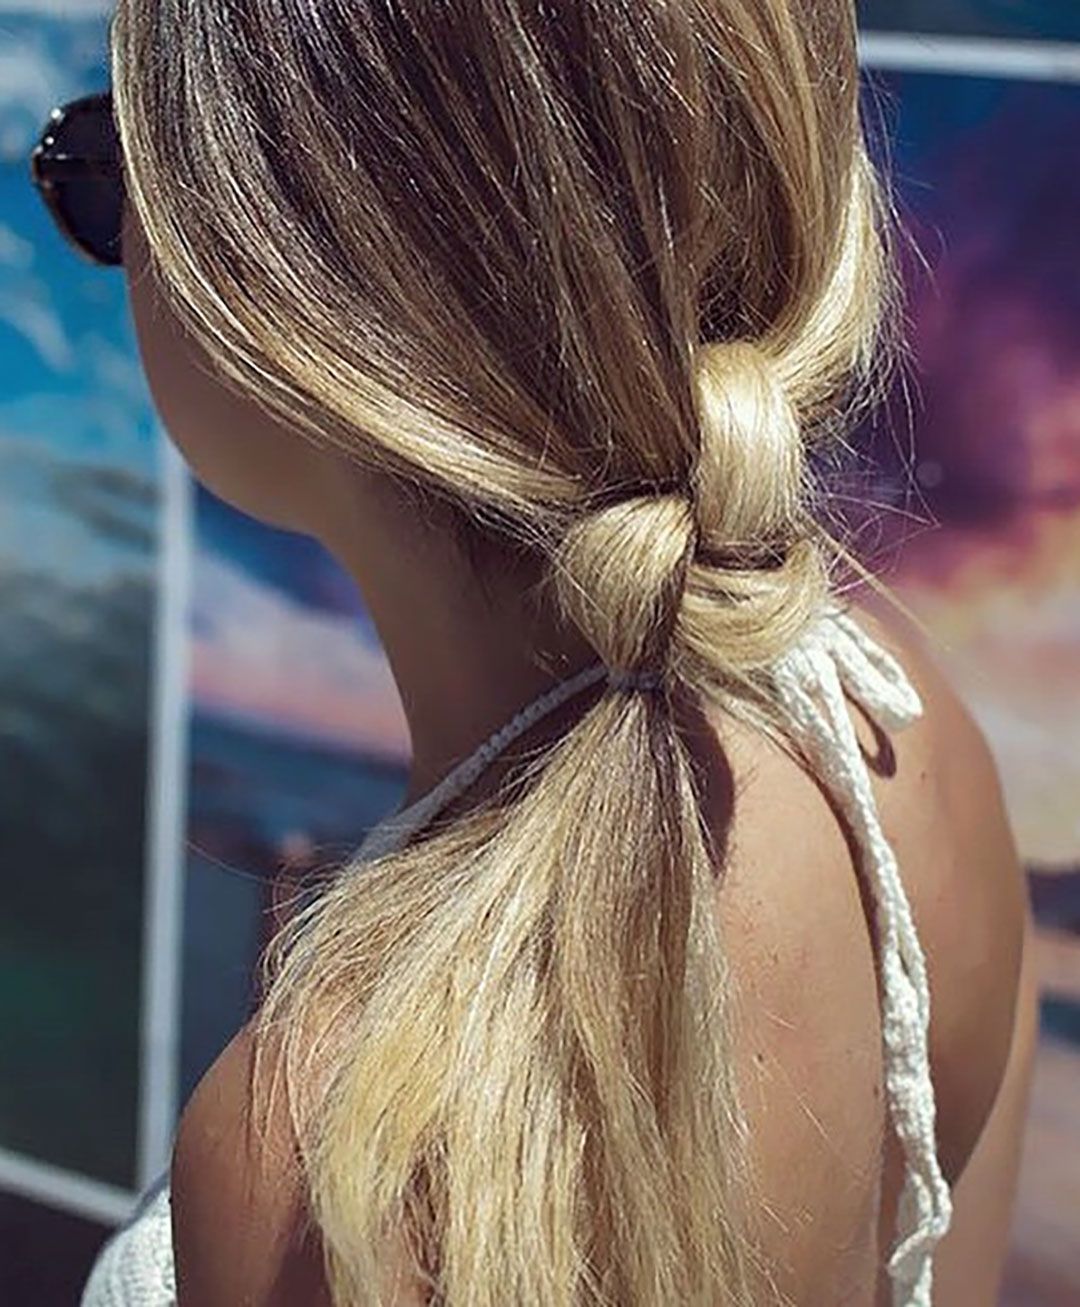 Feel As A Princess With Our 30 Side Ponytail Looks  LoveHairStyles